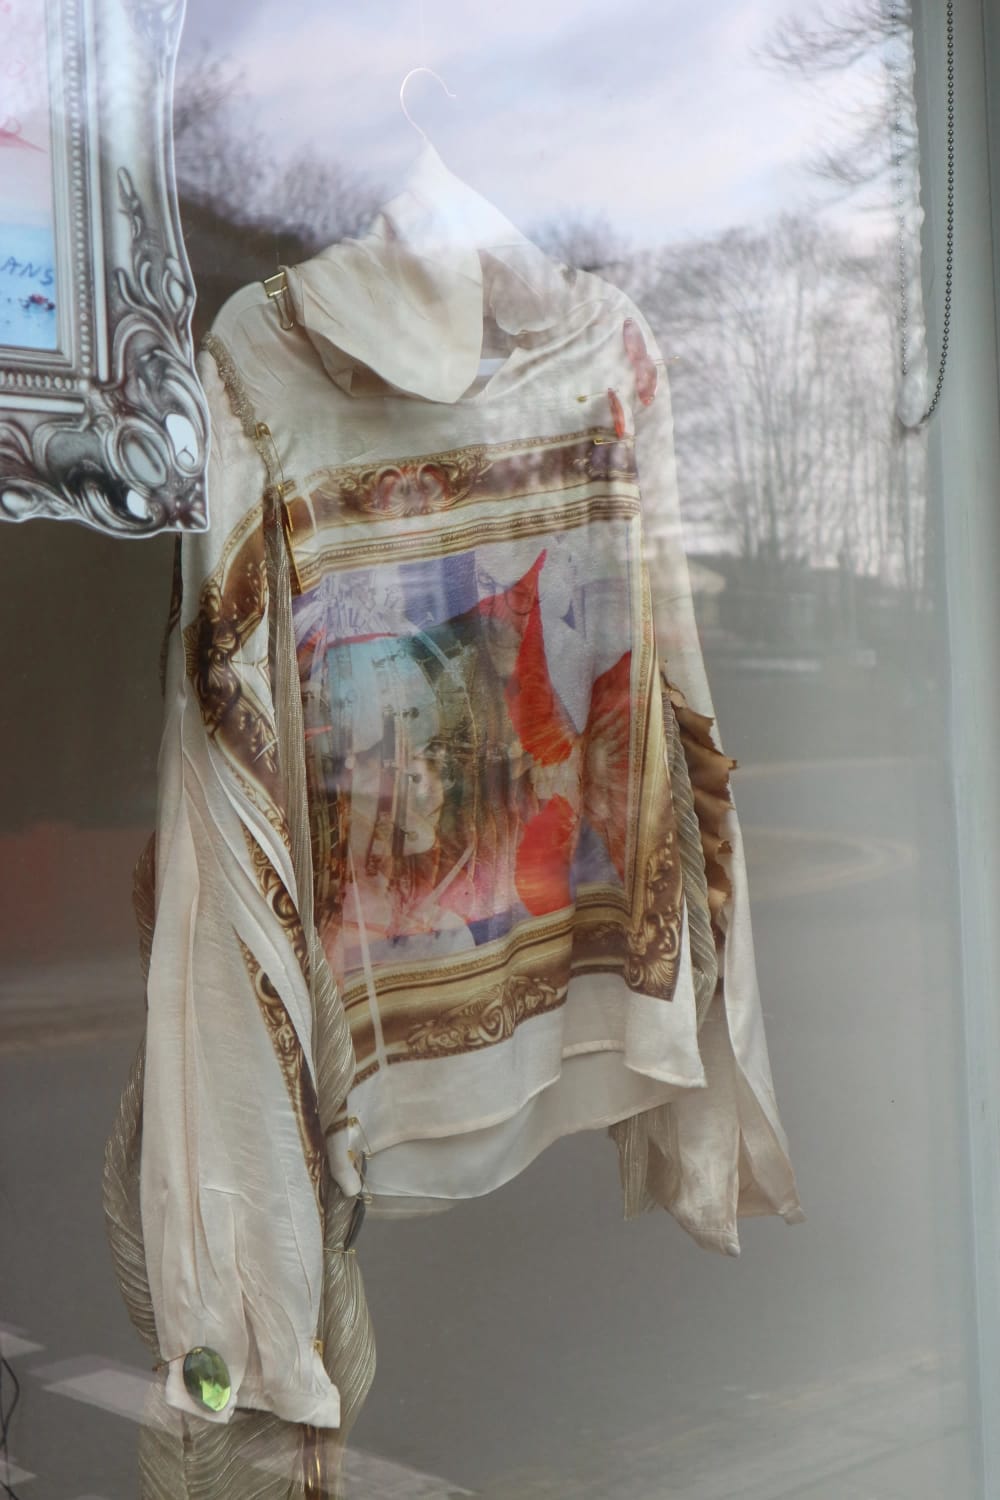 A decorated floaty garment hangs in a large window.